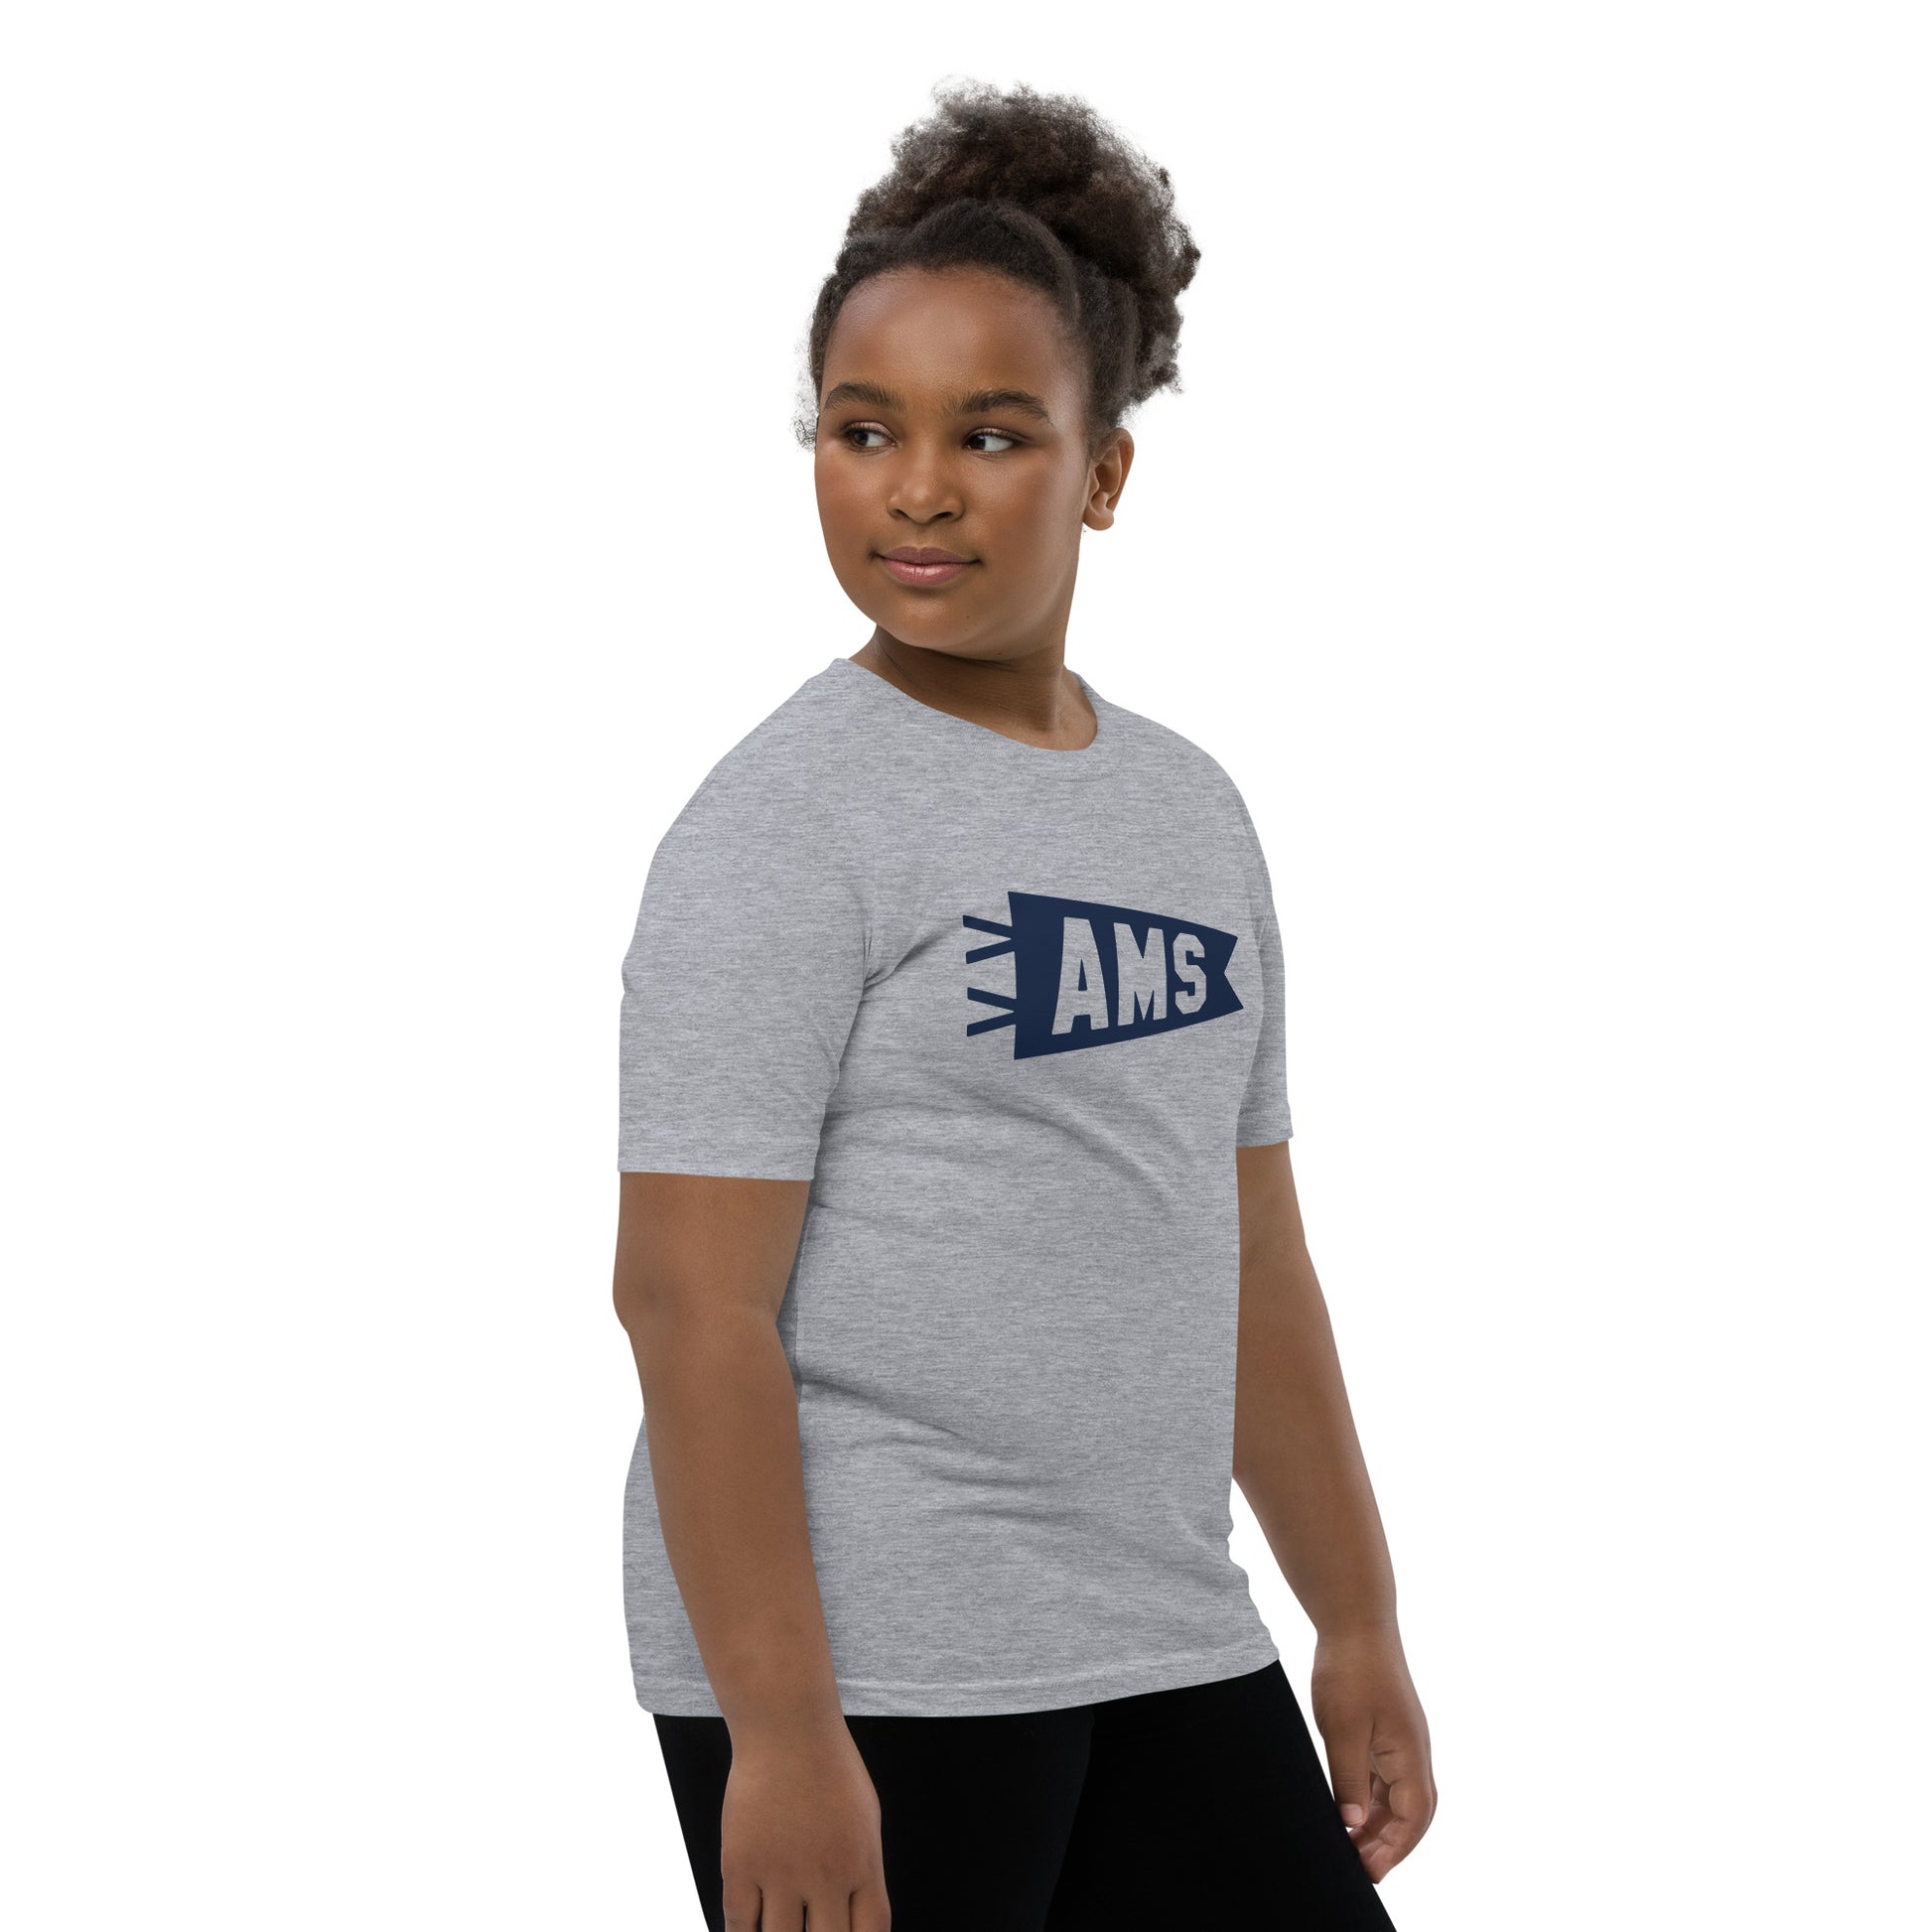 Kid's Airport Code Tee - Navy Blue Graphic • AMS Amsterdam • YHM Designs - Image 03